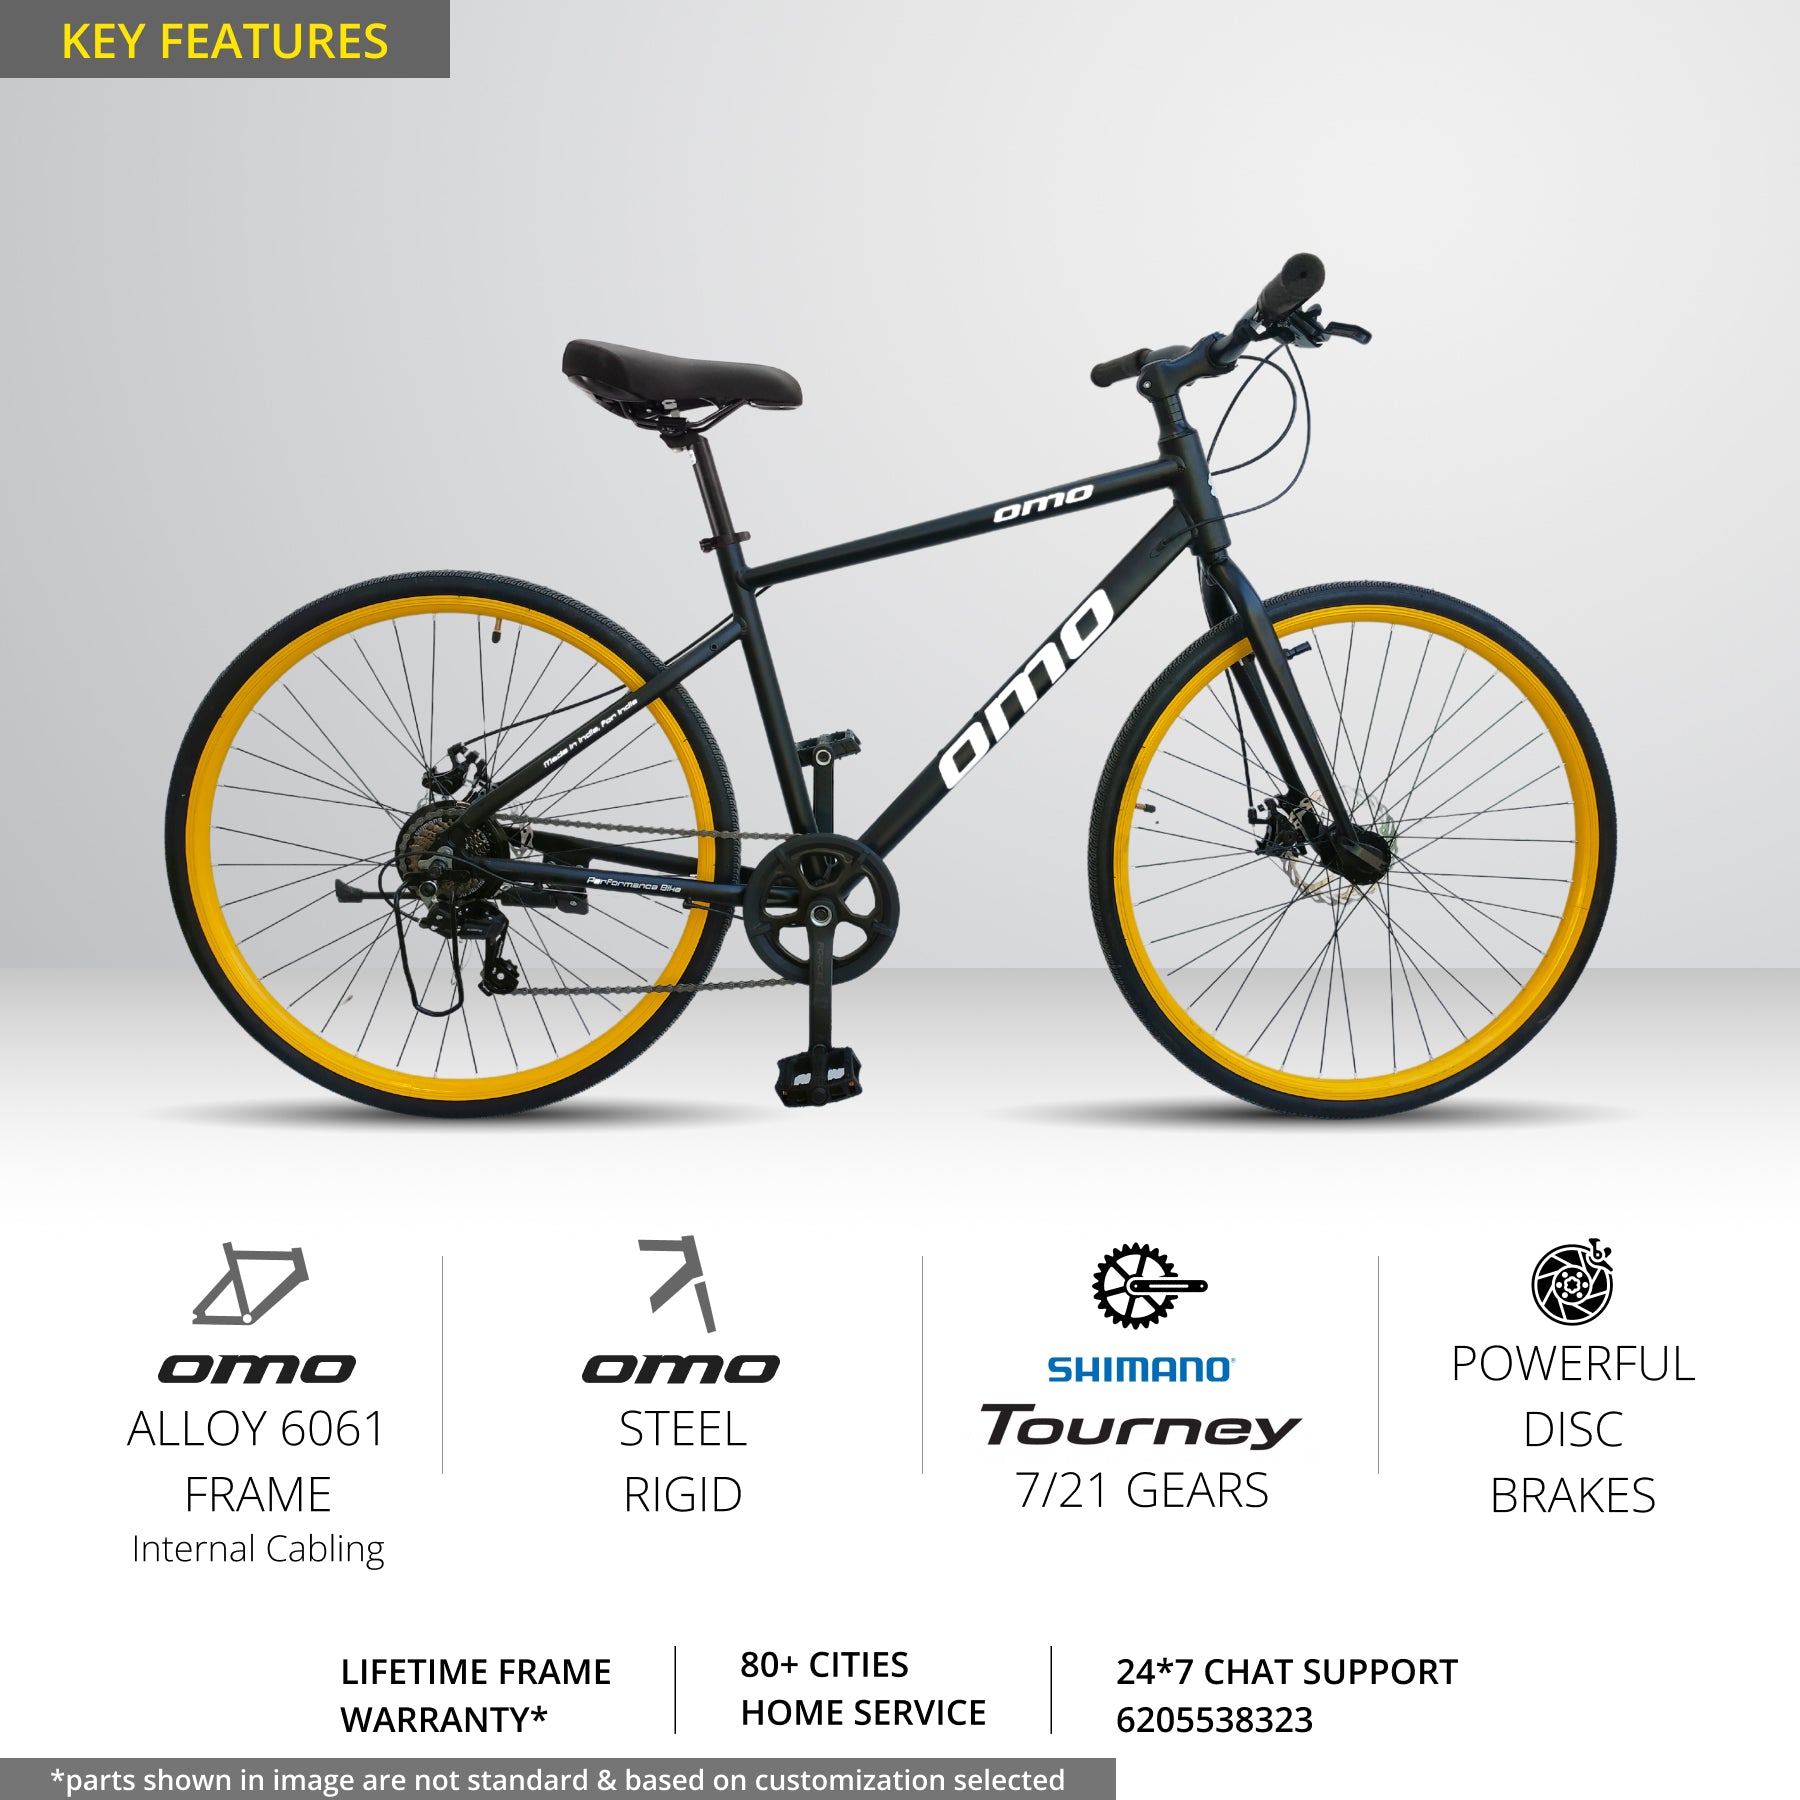 Omobikes alloy frame hampi geared hybrid bike under 20000 feature points